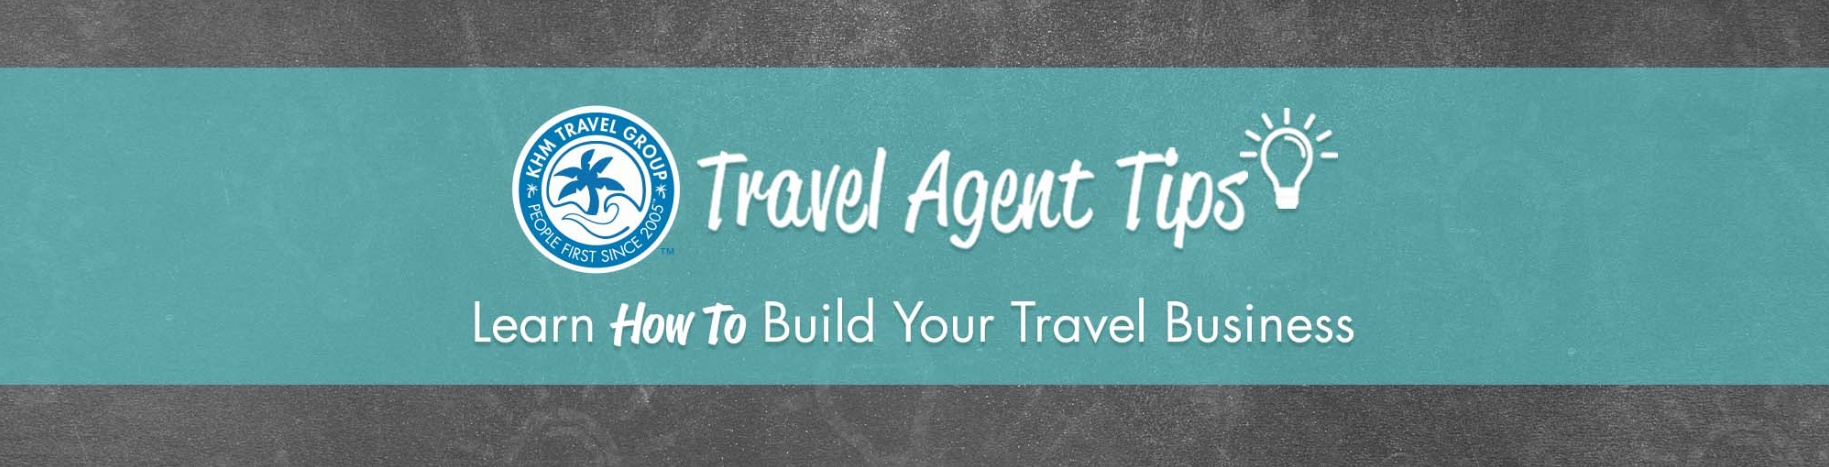 Travel Agent Tips Series